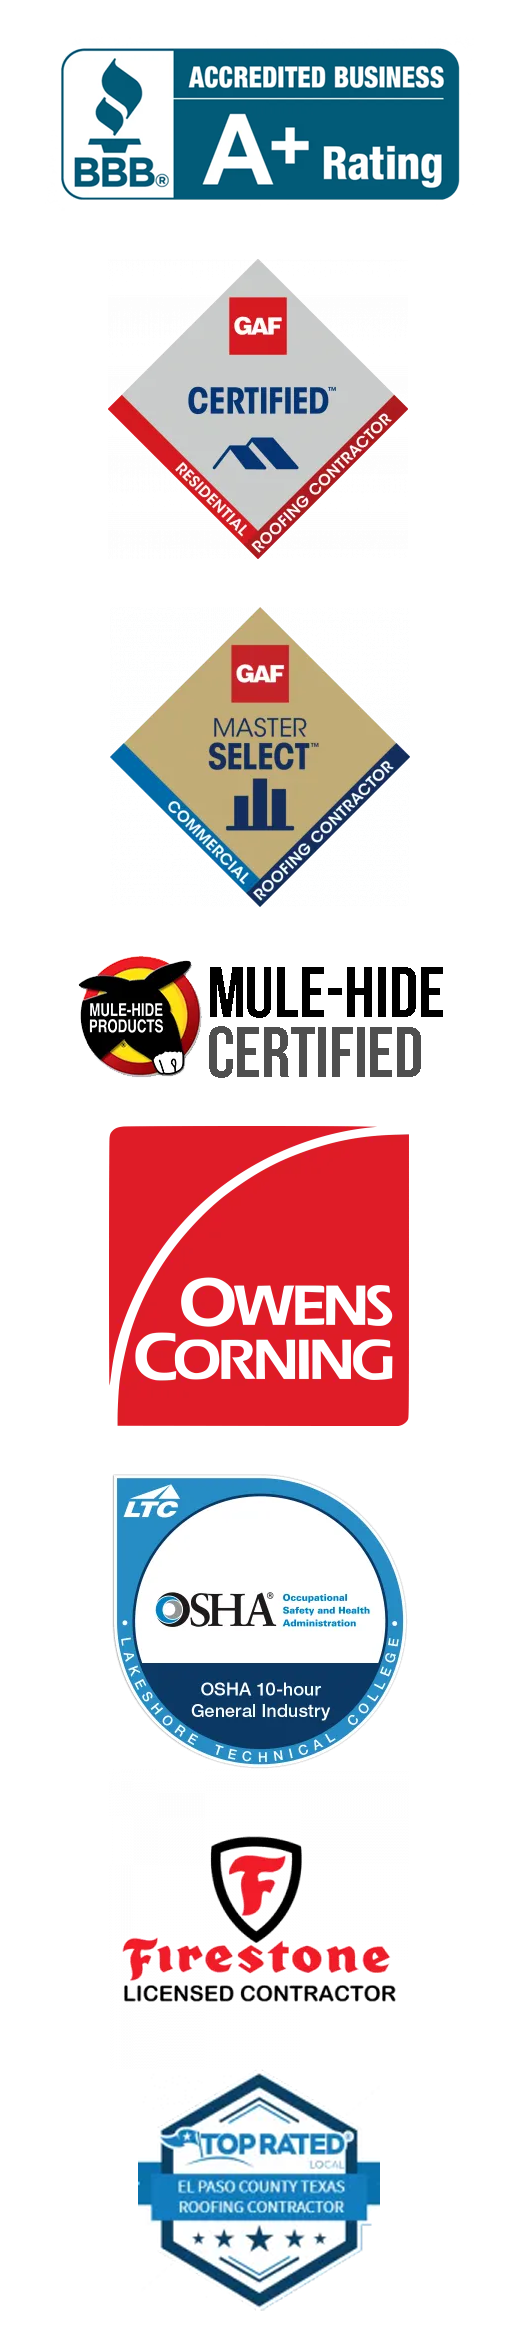 BBB A+ accredited business, GAF certified residential roofing contractor, GAF master select commercial roofing contractor, Mule Hide certified, owens corning, OSHA 10 hour general industry, Firestone licensed contractor, Top rated El Paso County Texas Roofing contractor El Paso, TX